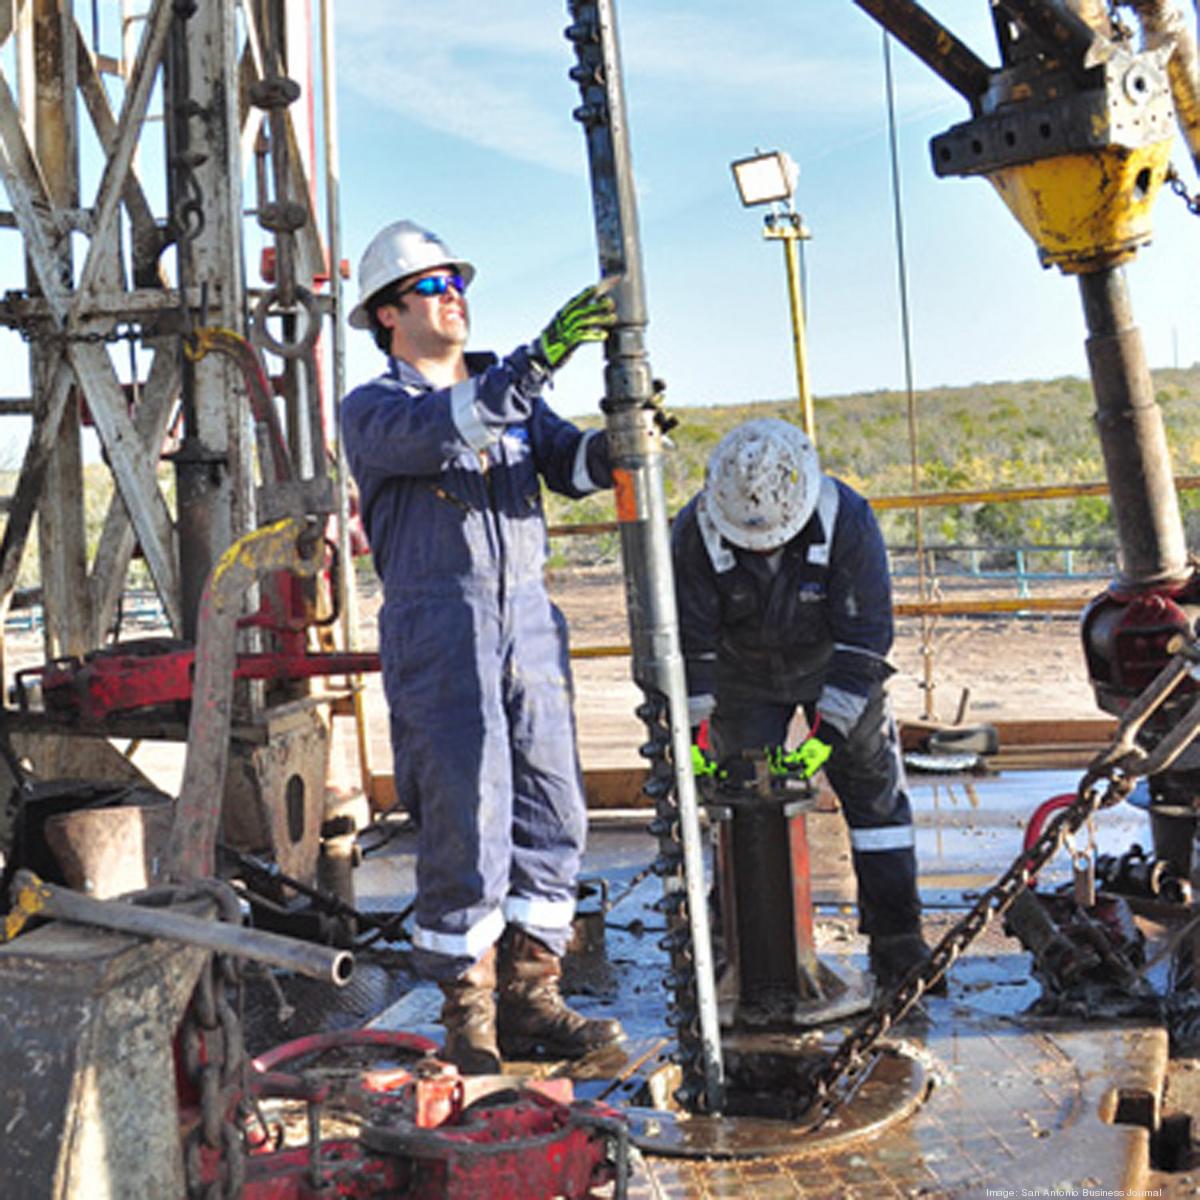 Eagle Ford Shale leads Texas in new horizontal drilling permits